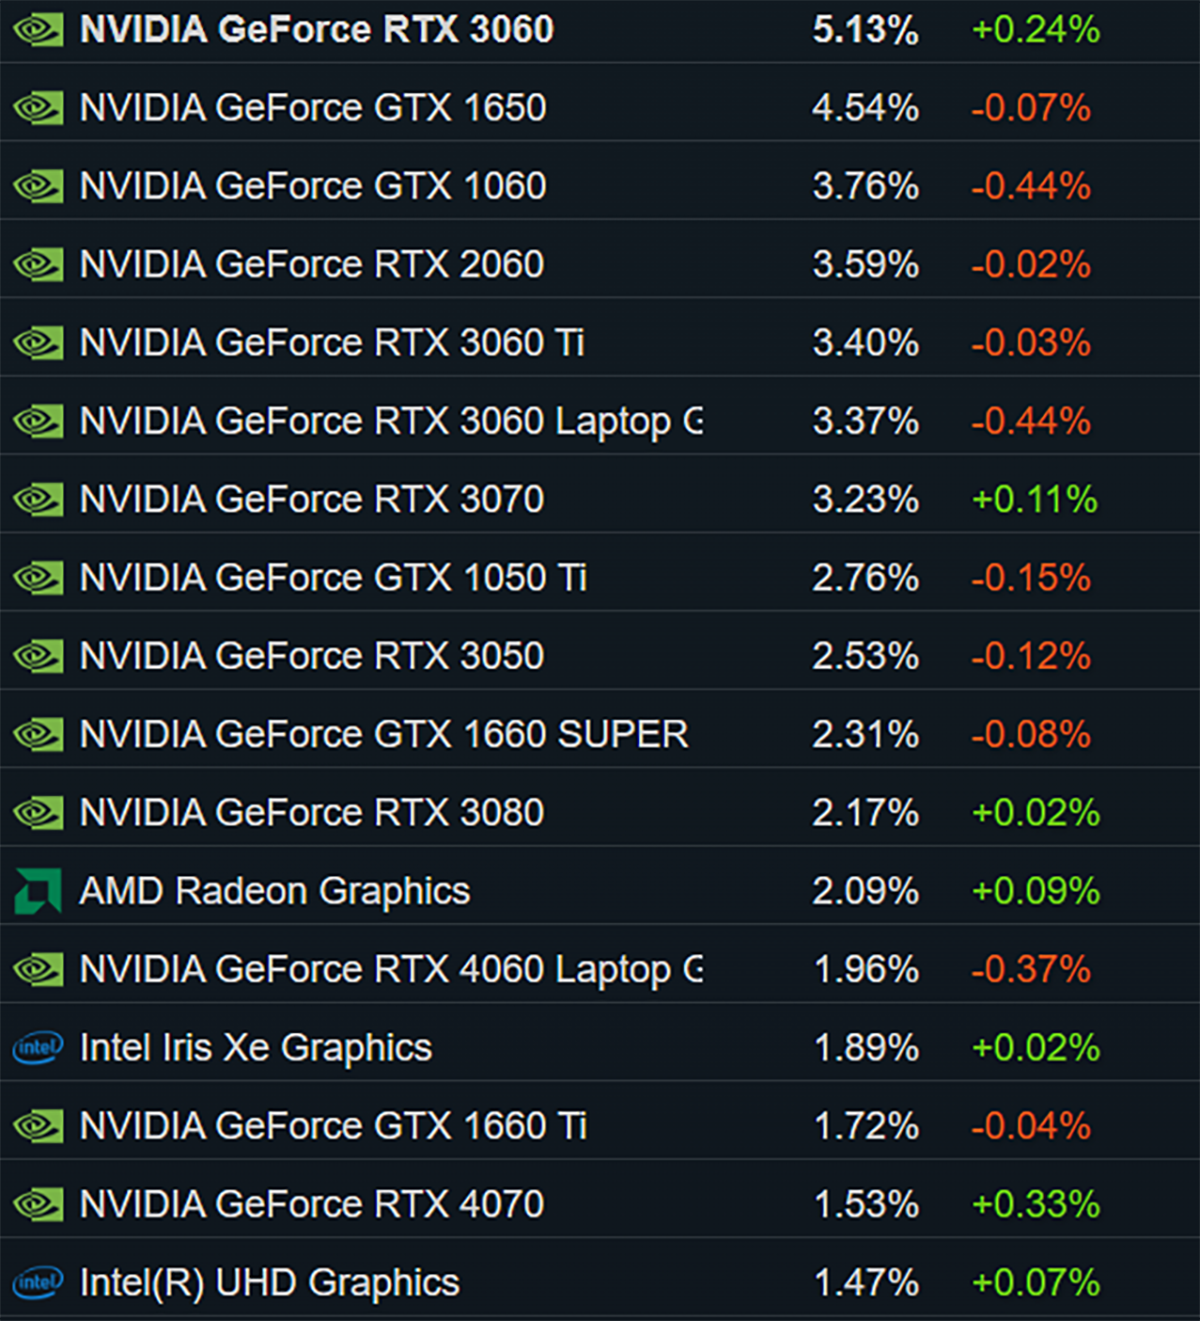 Steam users want the cheapest NVIDIA RTX